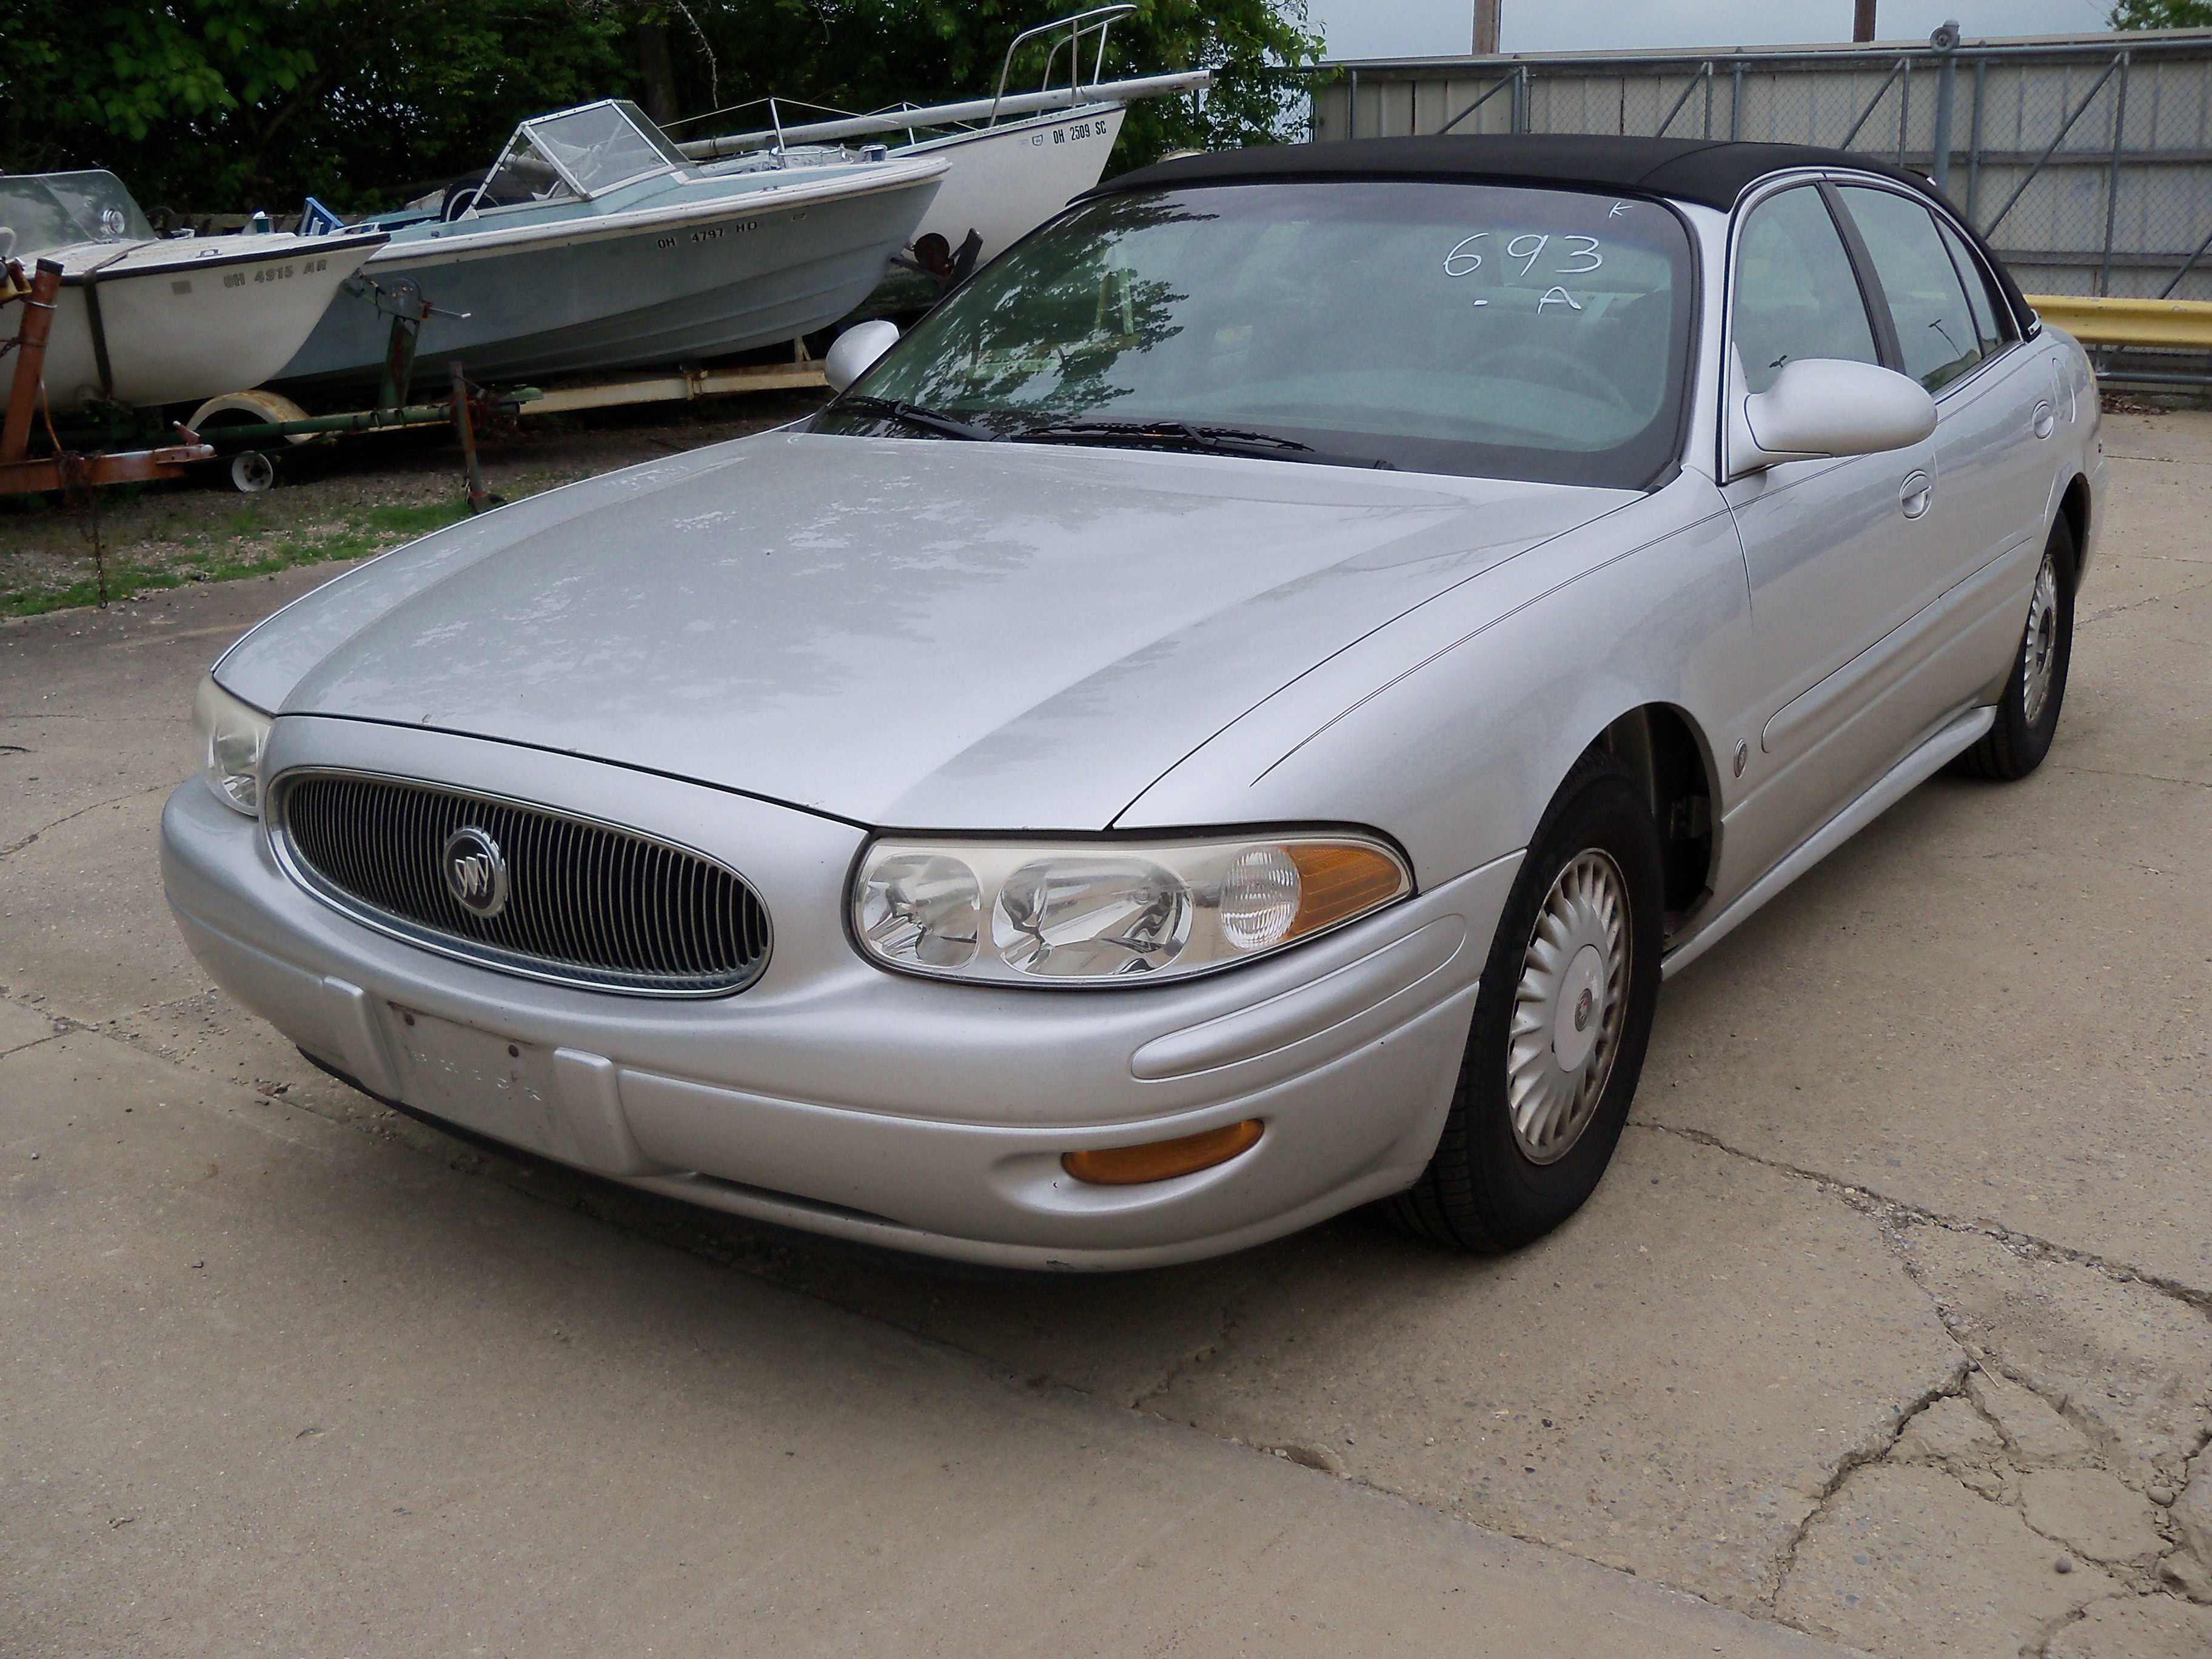 00BuickLeSabre_front